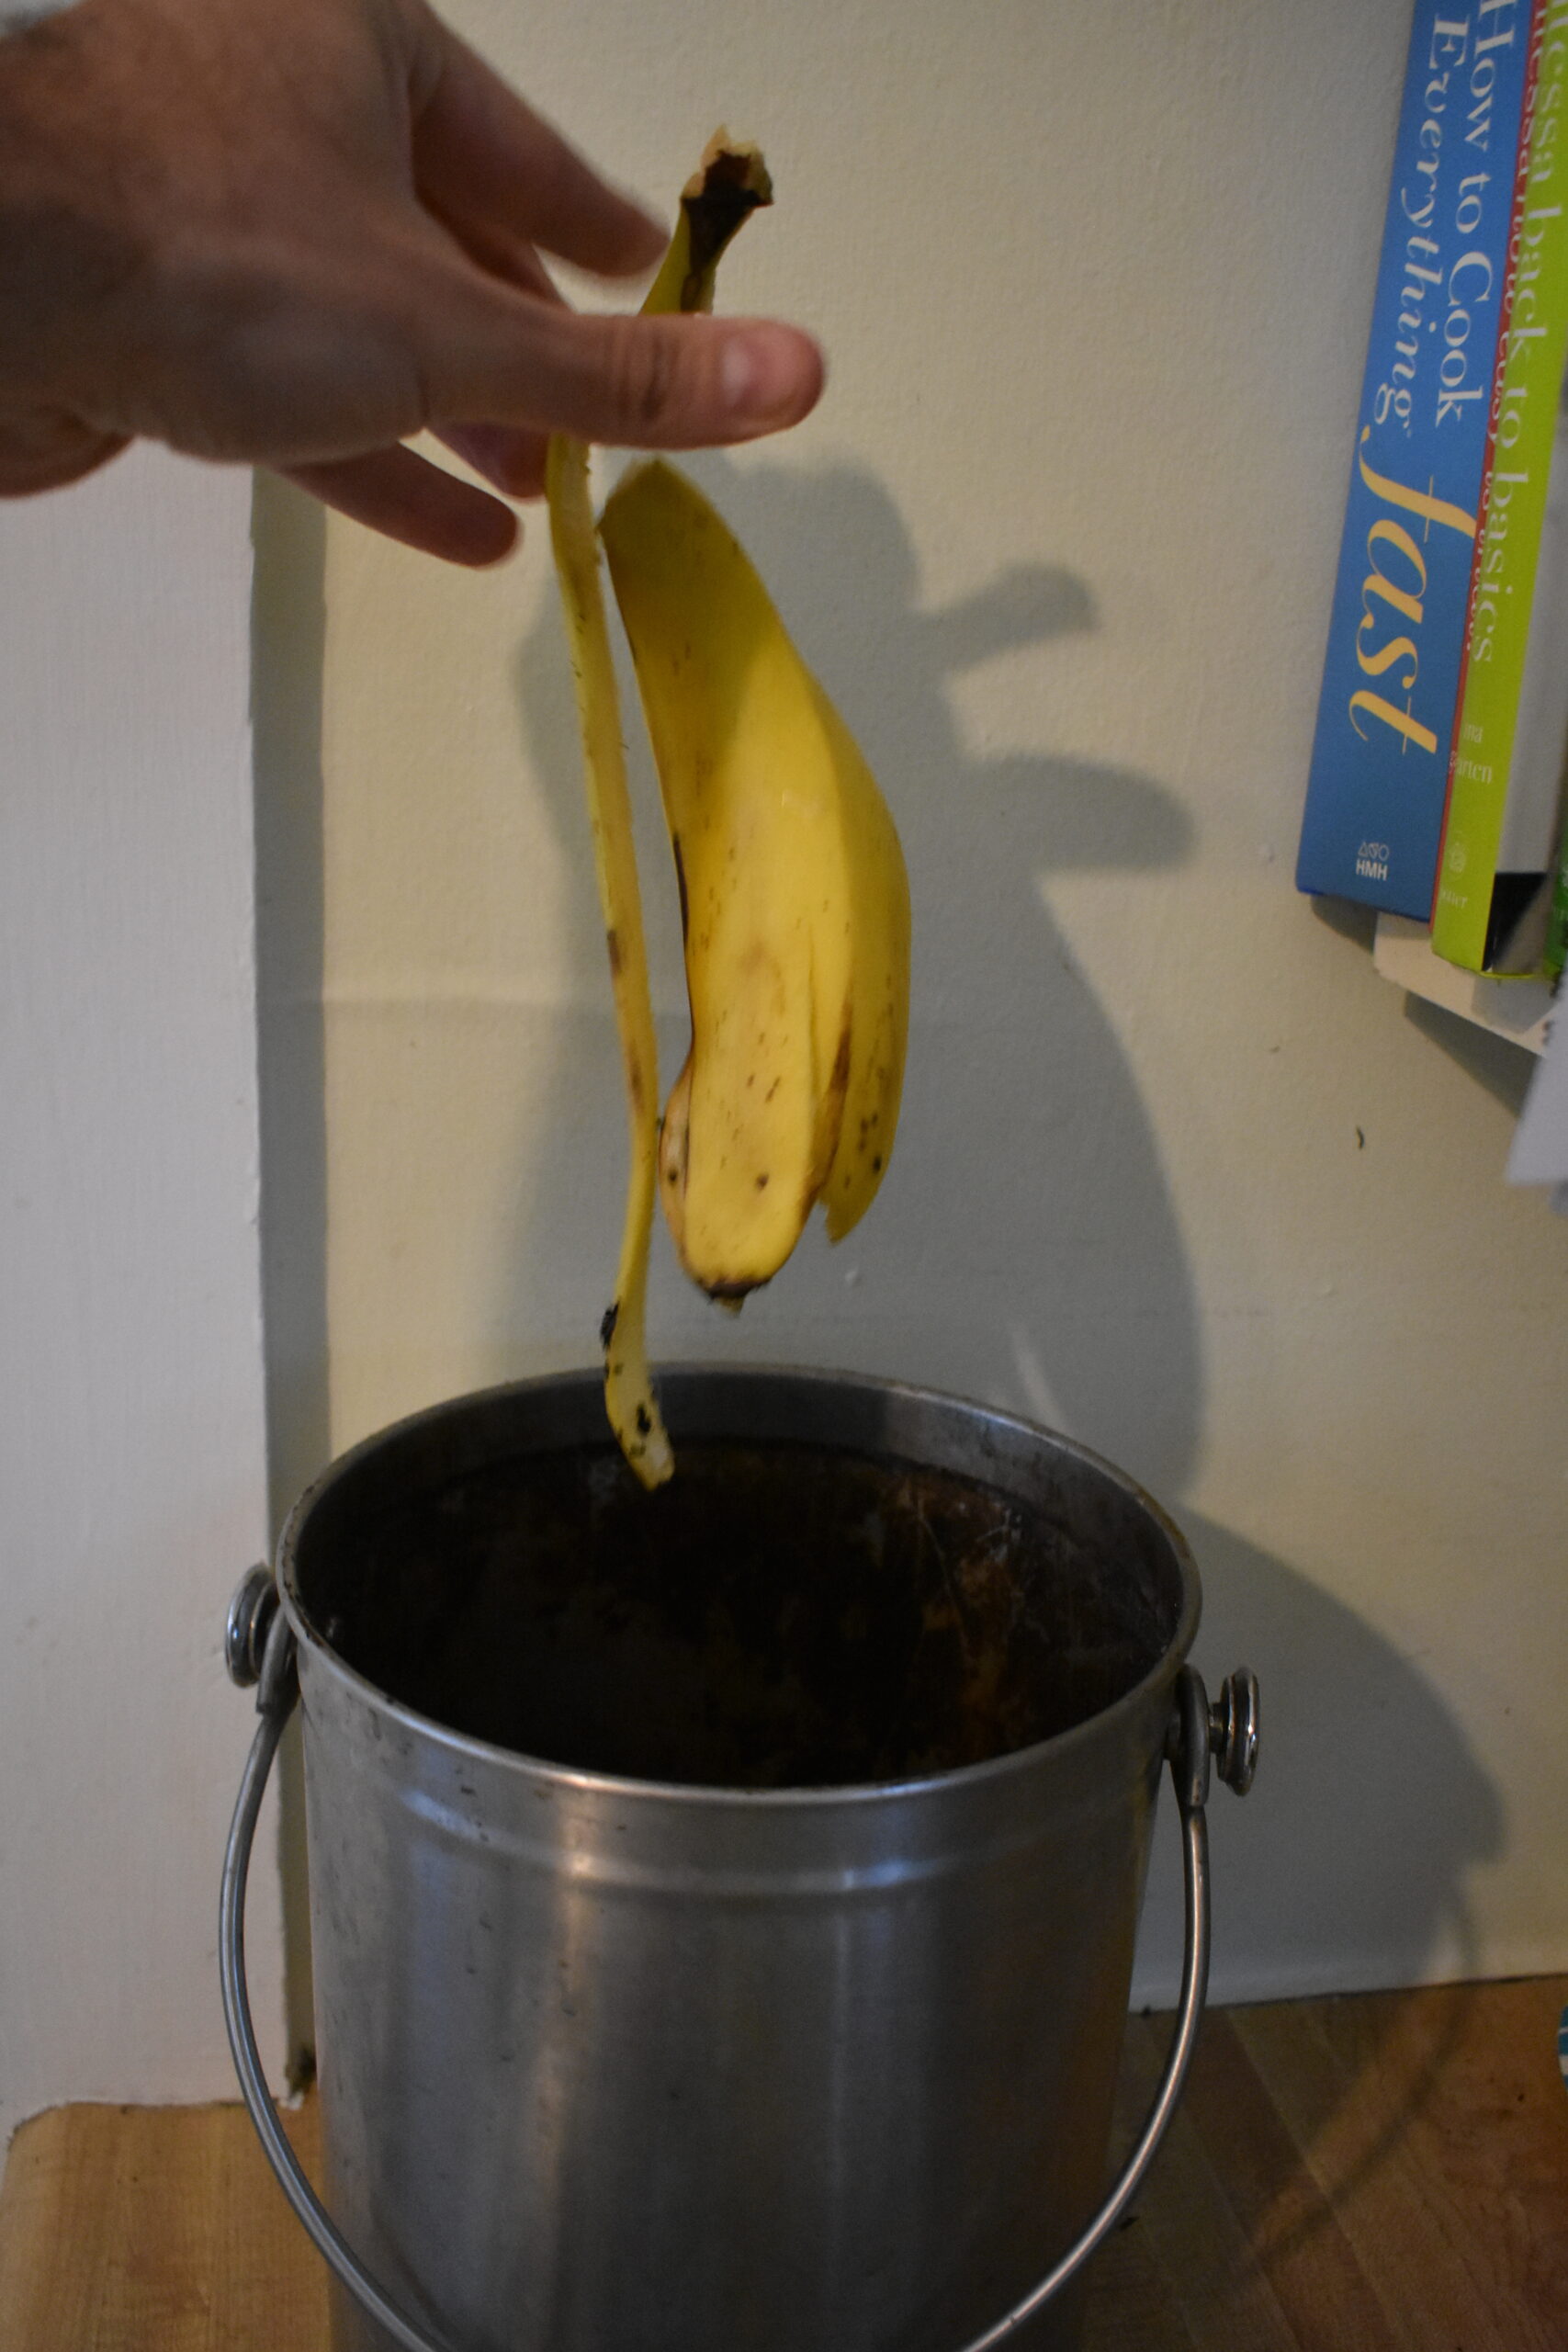 A countertop compost pail is a good tool for collecting banana peels, egg shells, coffee grounds, vegetable scraps and other organic waste in the kitchen before depositing it in a pile or tumbler outdoors.